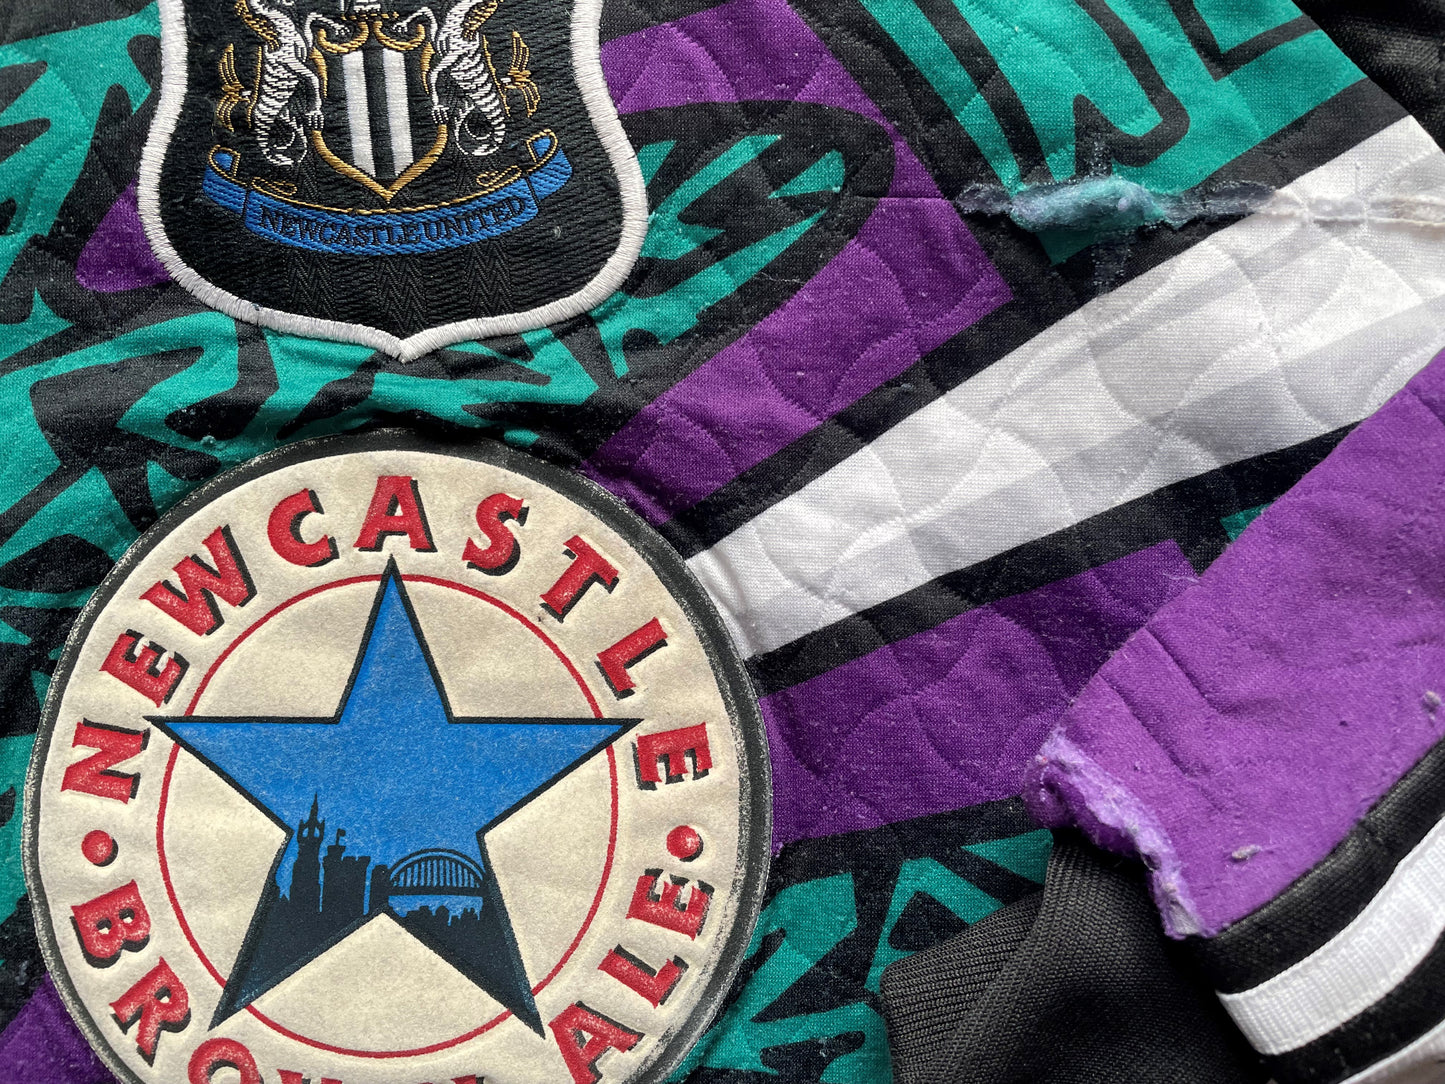 Newcastle Goalkeeper Shirt 1995-96 (poor) Adults XSmall. Height 22 inches